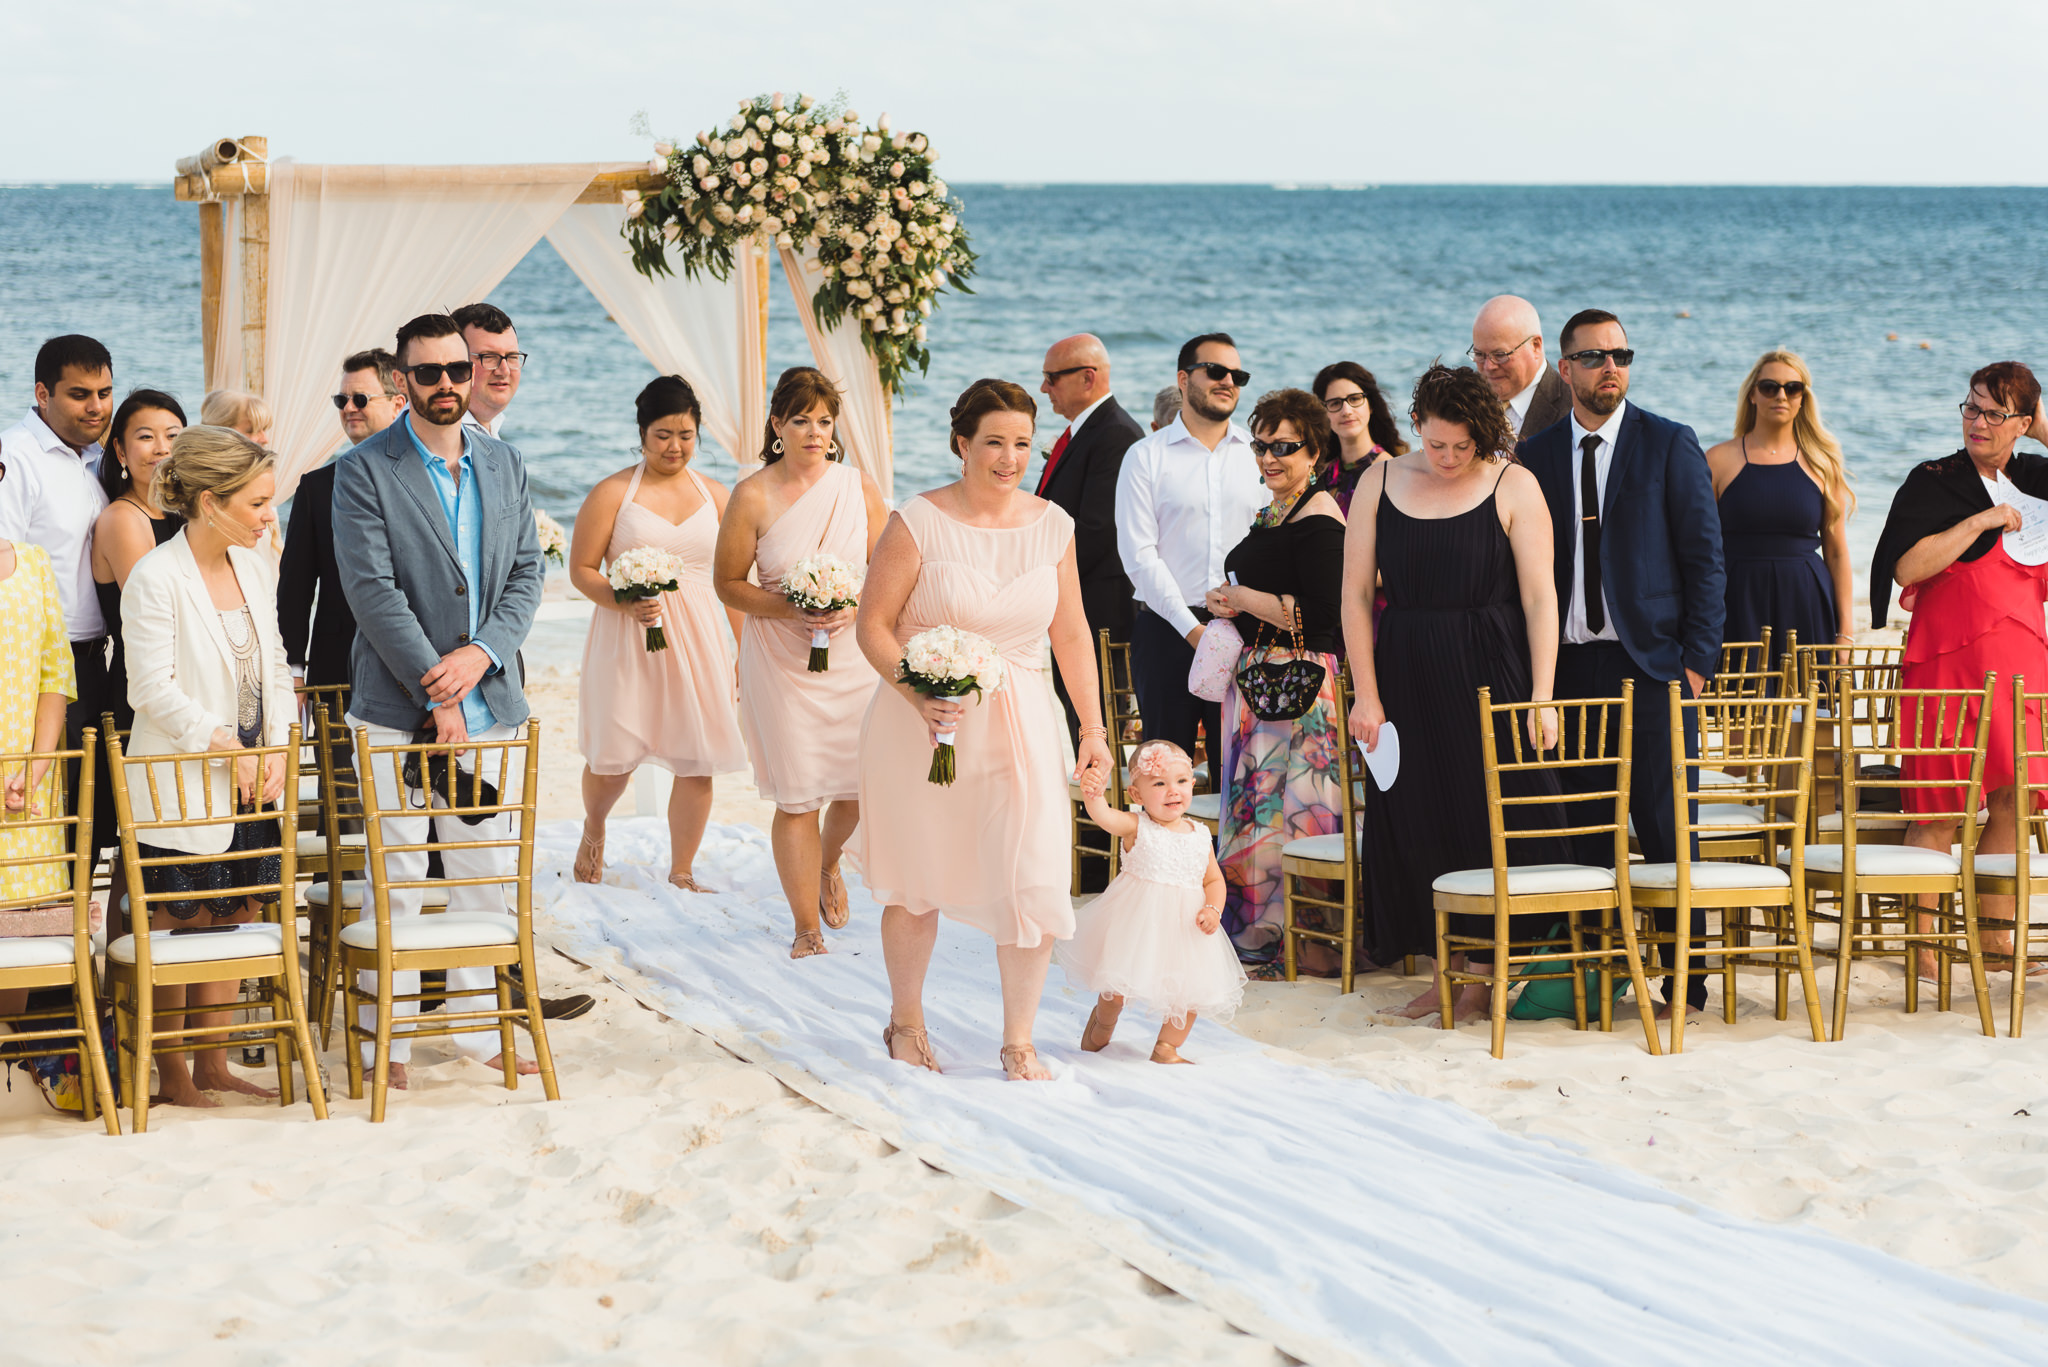 wedding party and guests exit beach ceremony in front of ocean at Now Sapphire Resort in Mexico